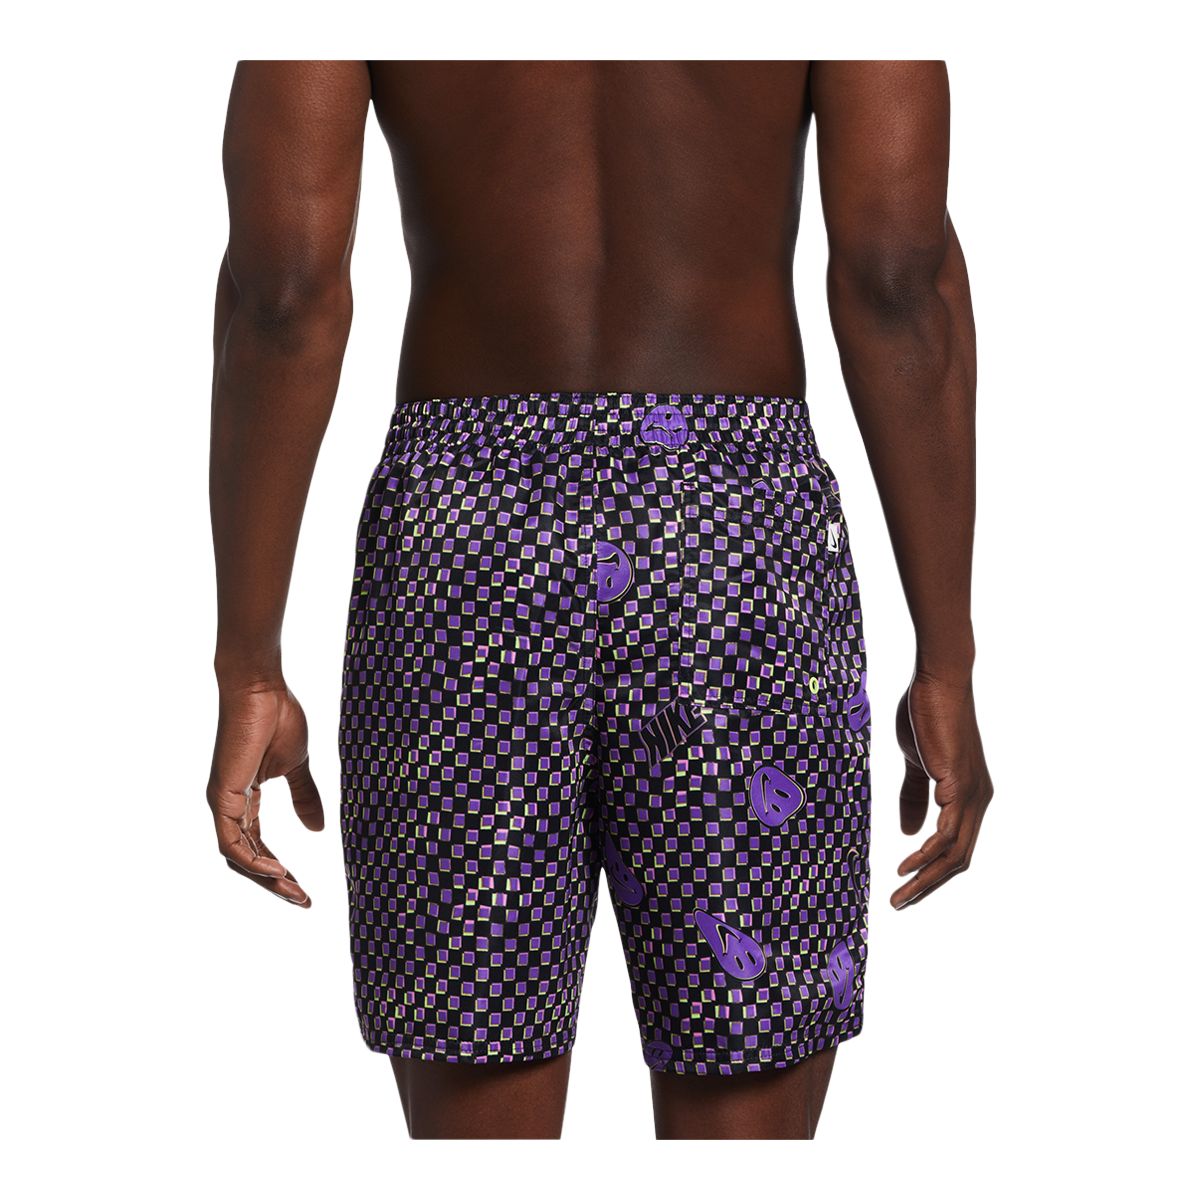 Nike Men's Smiles Check 7 Inch Volley Shorts